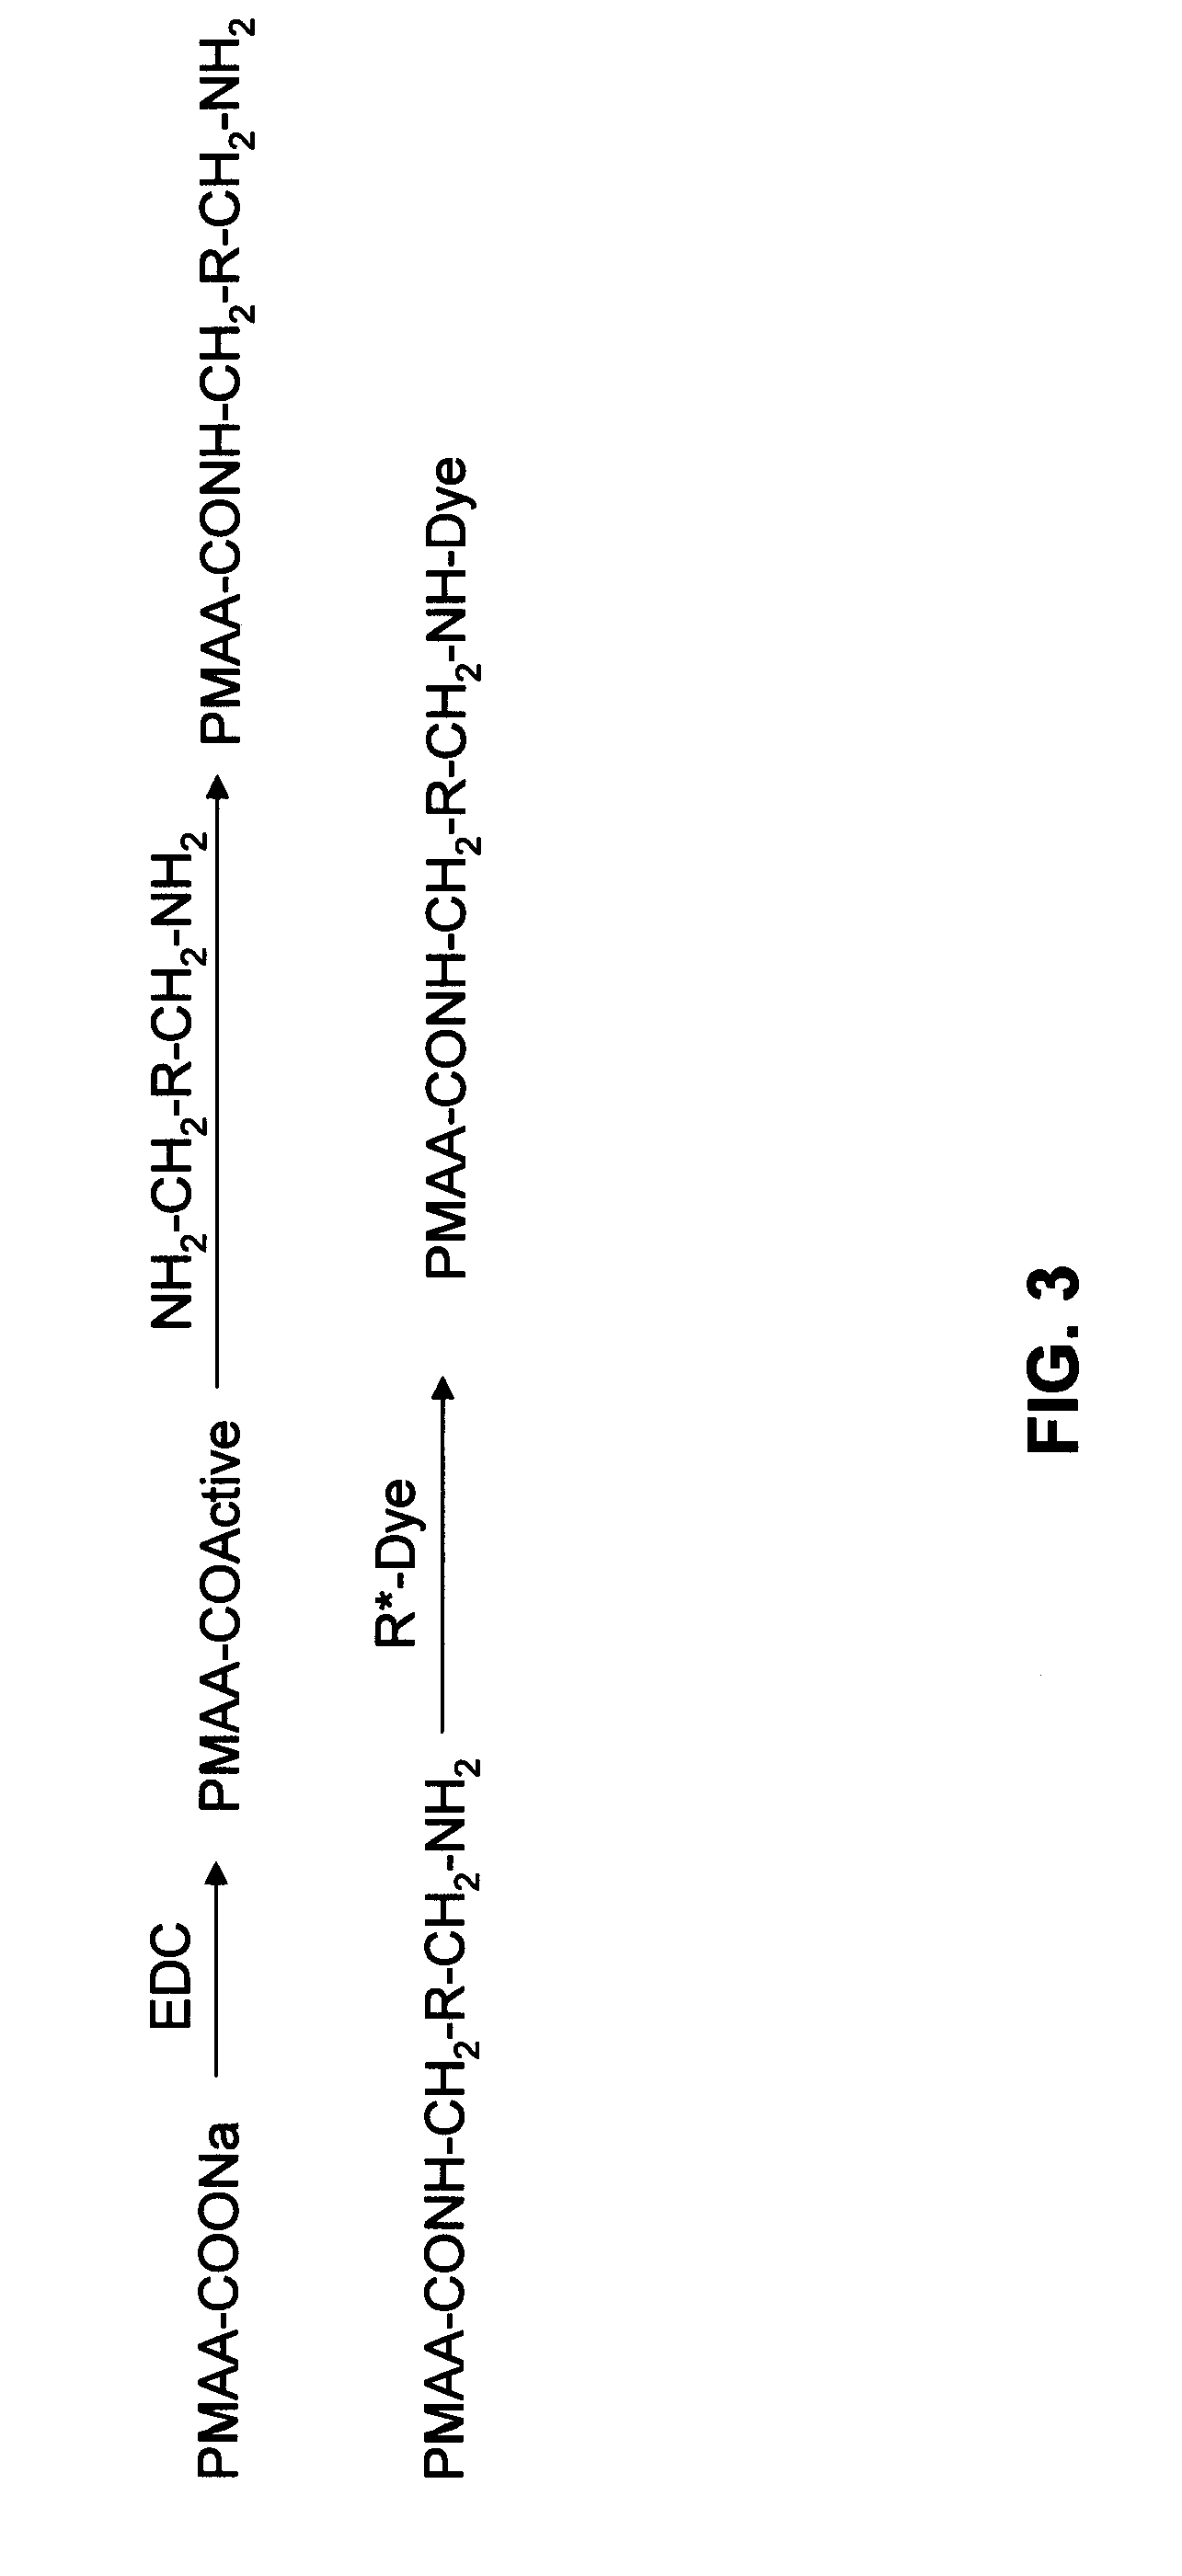 Color-Coded Polymeric Particles of Predetermined Size for Therapeutic and/or Diagnostic Applications and Related Methods